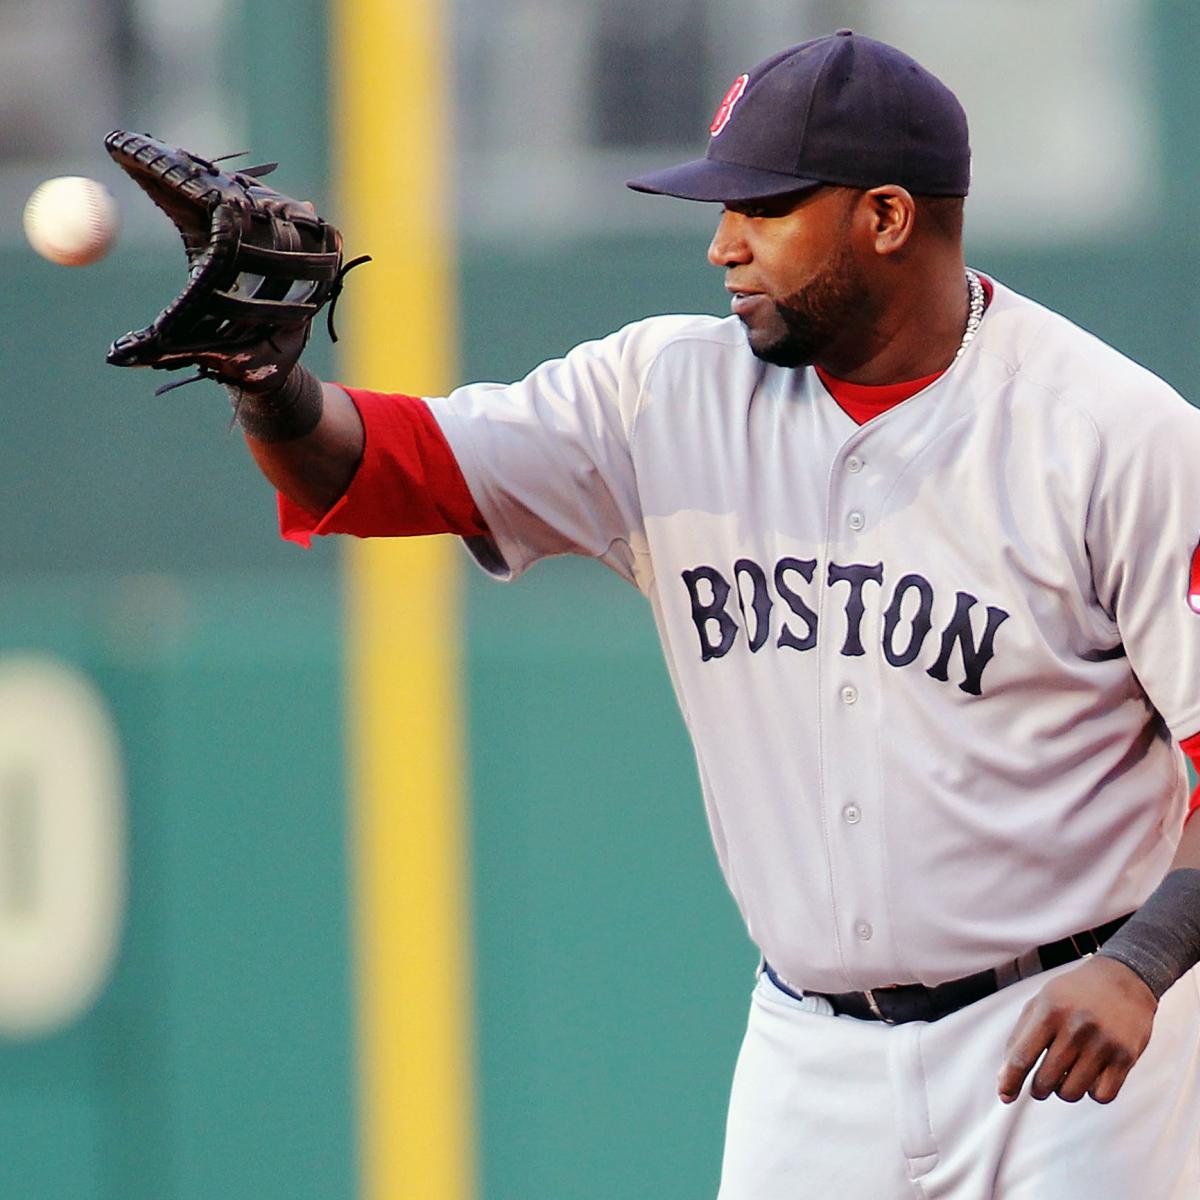 The Red Sox are off to their worst home start in 73 years